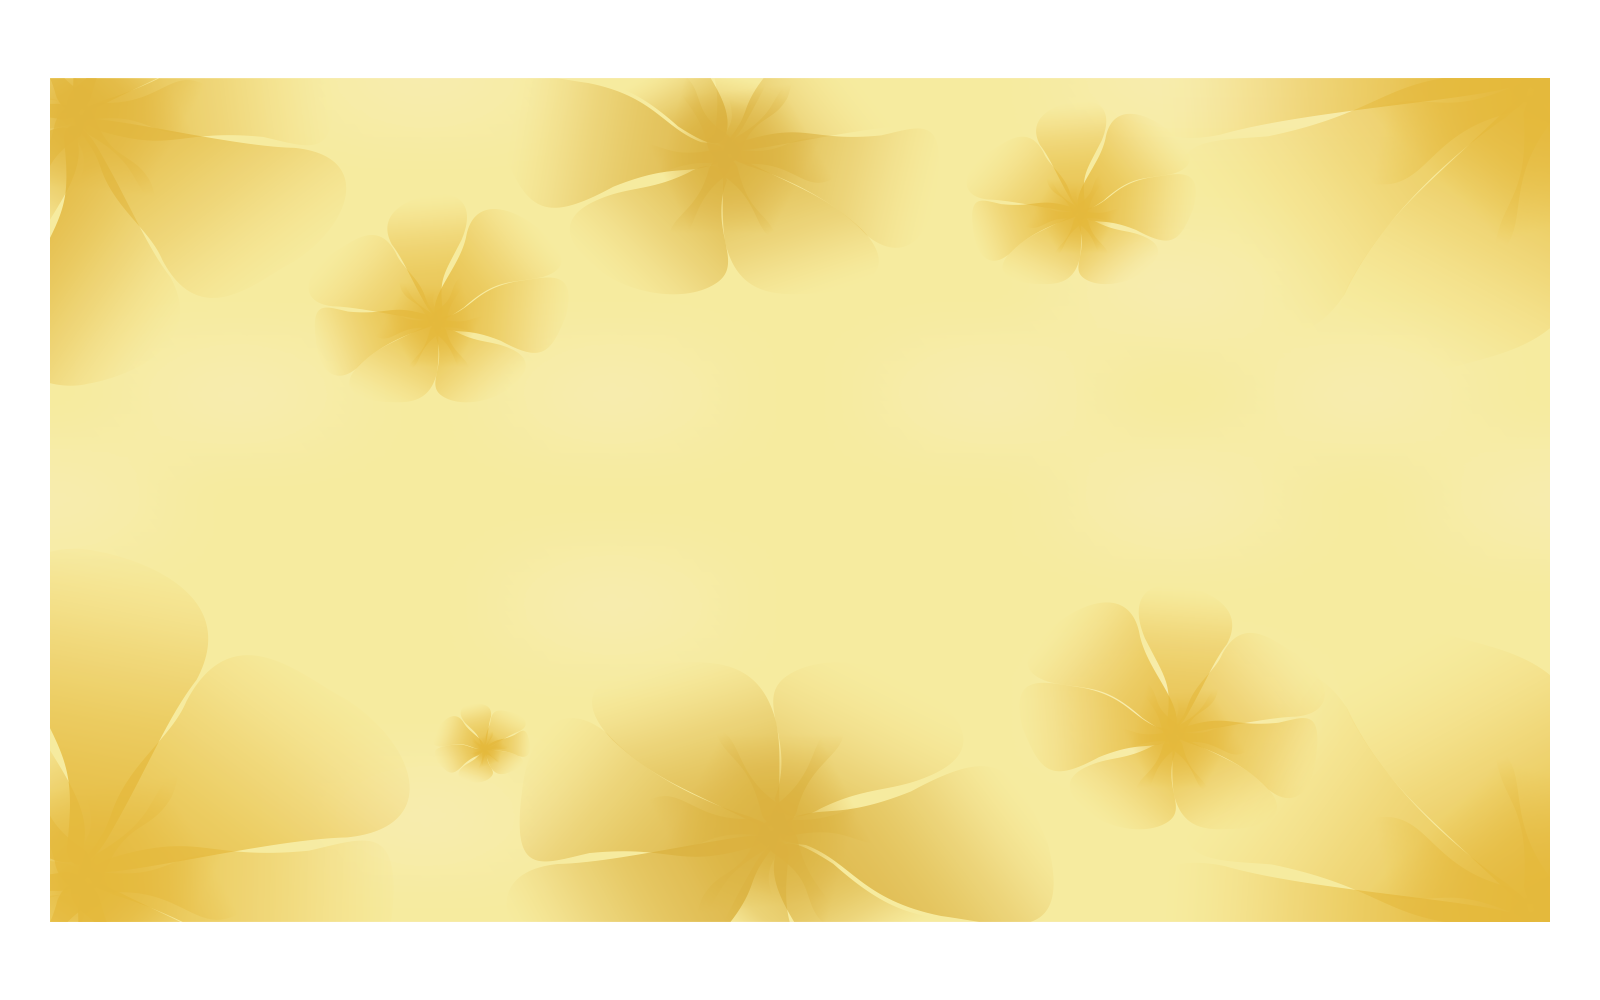 Background Image in Yellow Color Scheme with Flowers